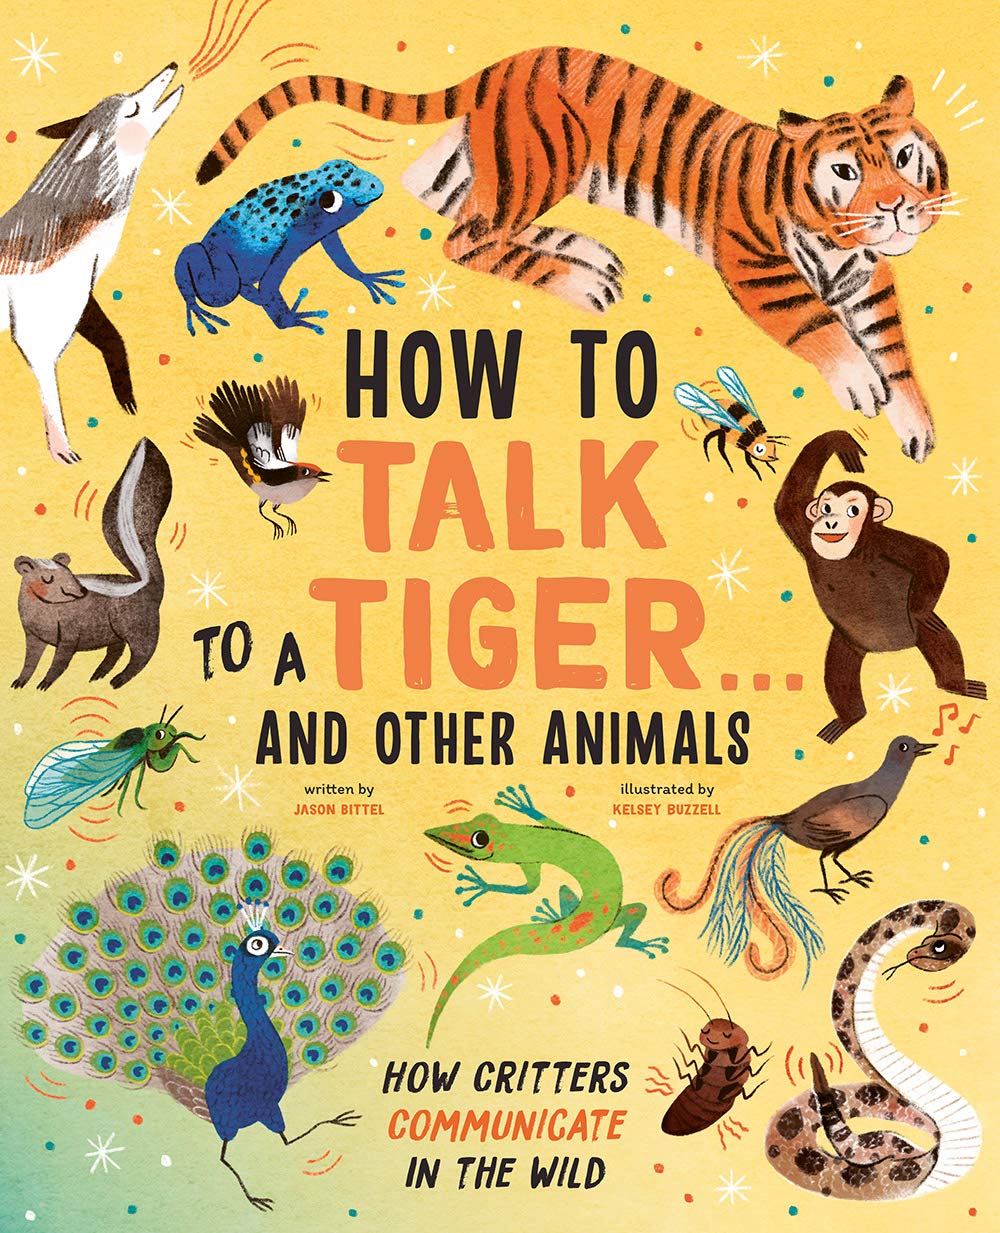 HOW TO TALK TO A TIGER - Kingfisher Road - Online Boutique